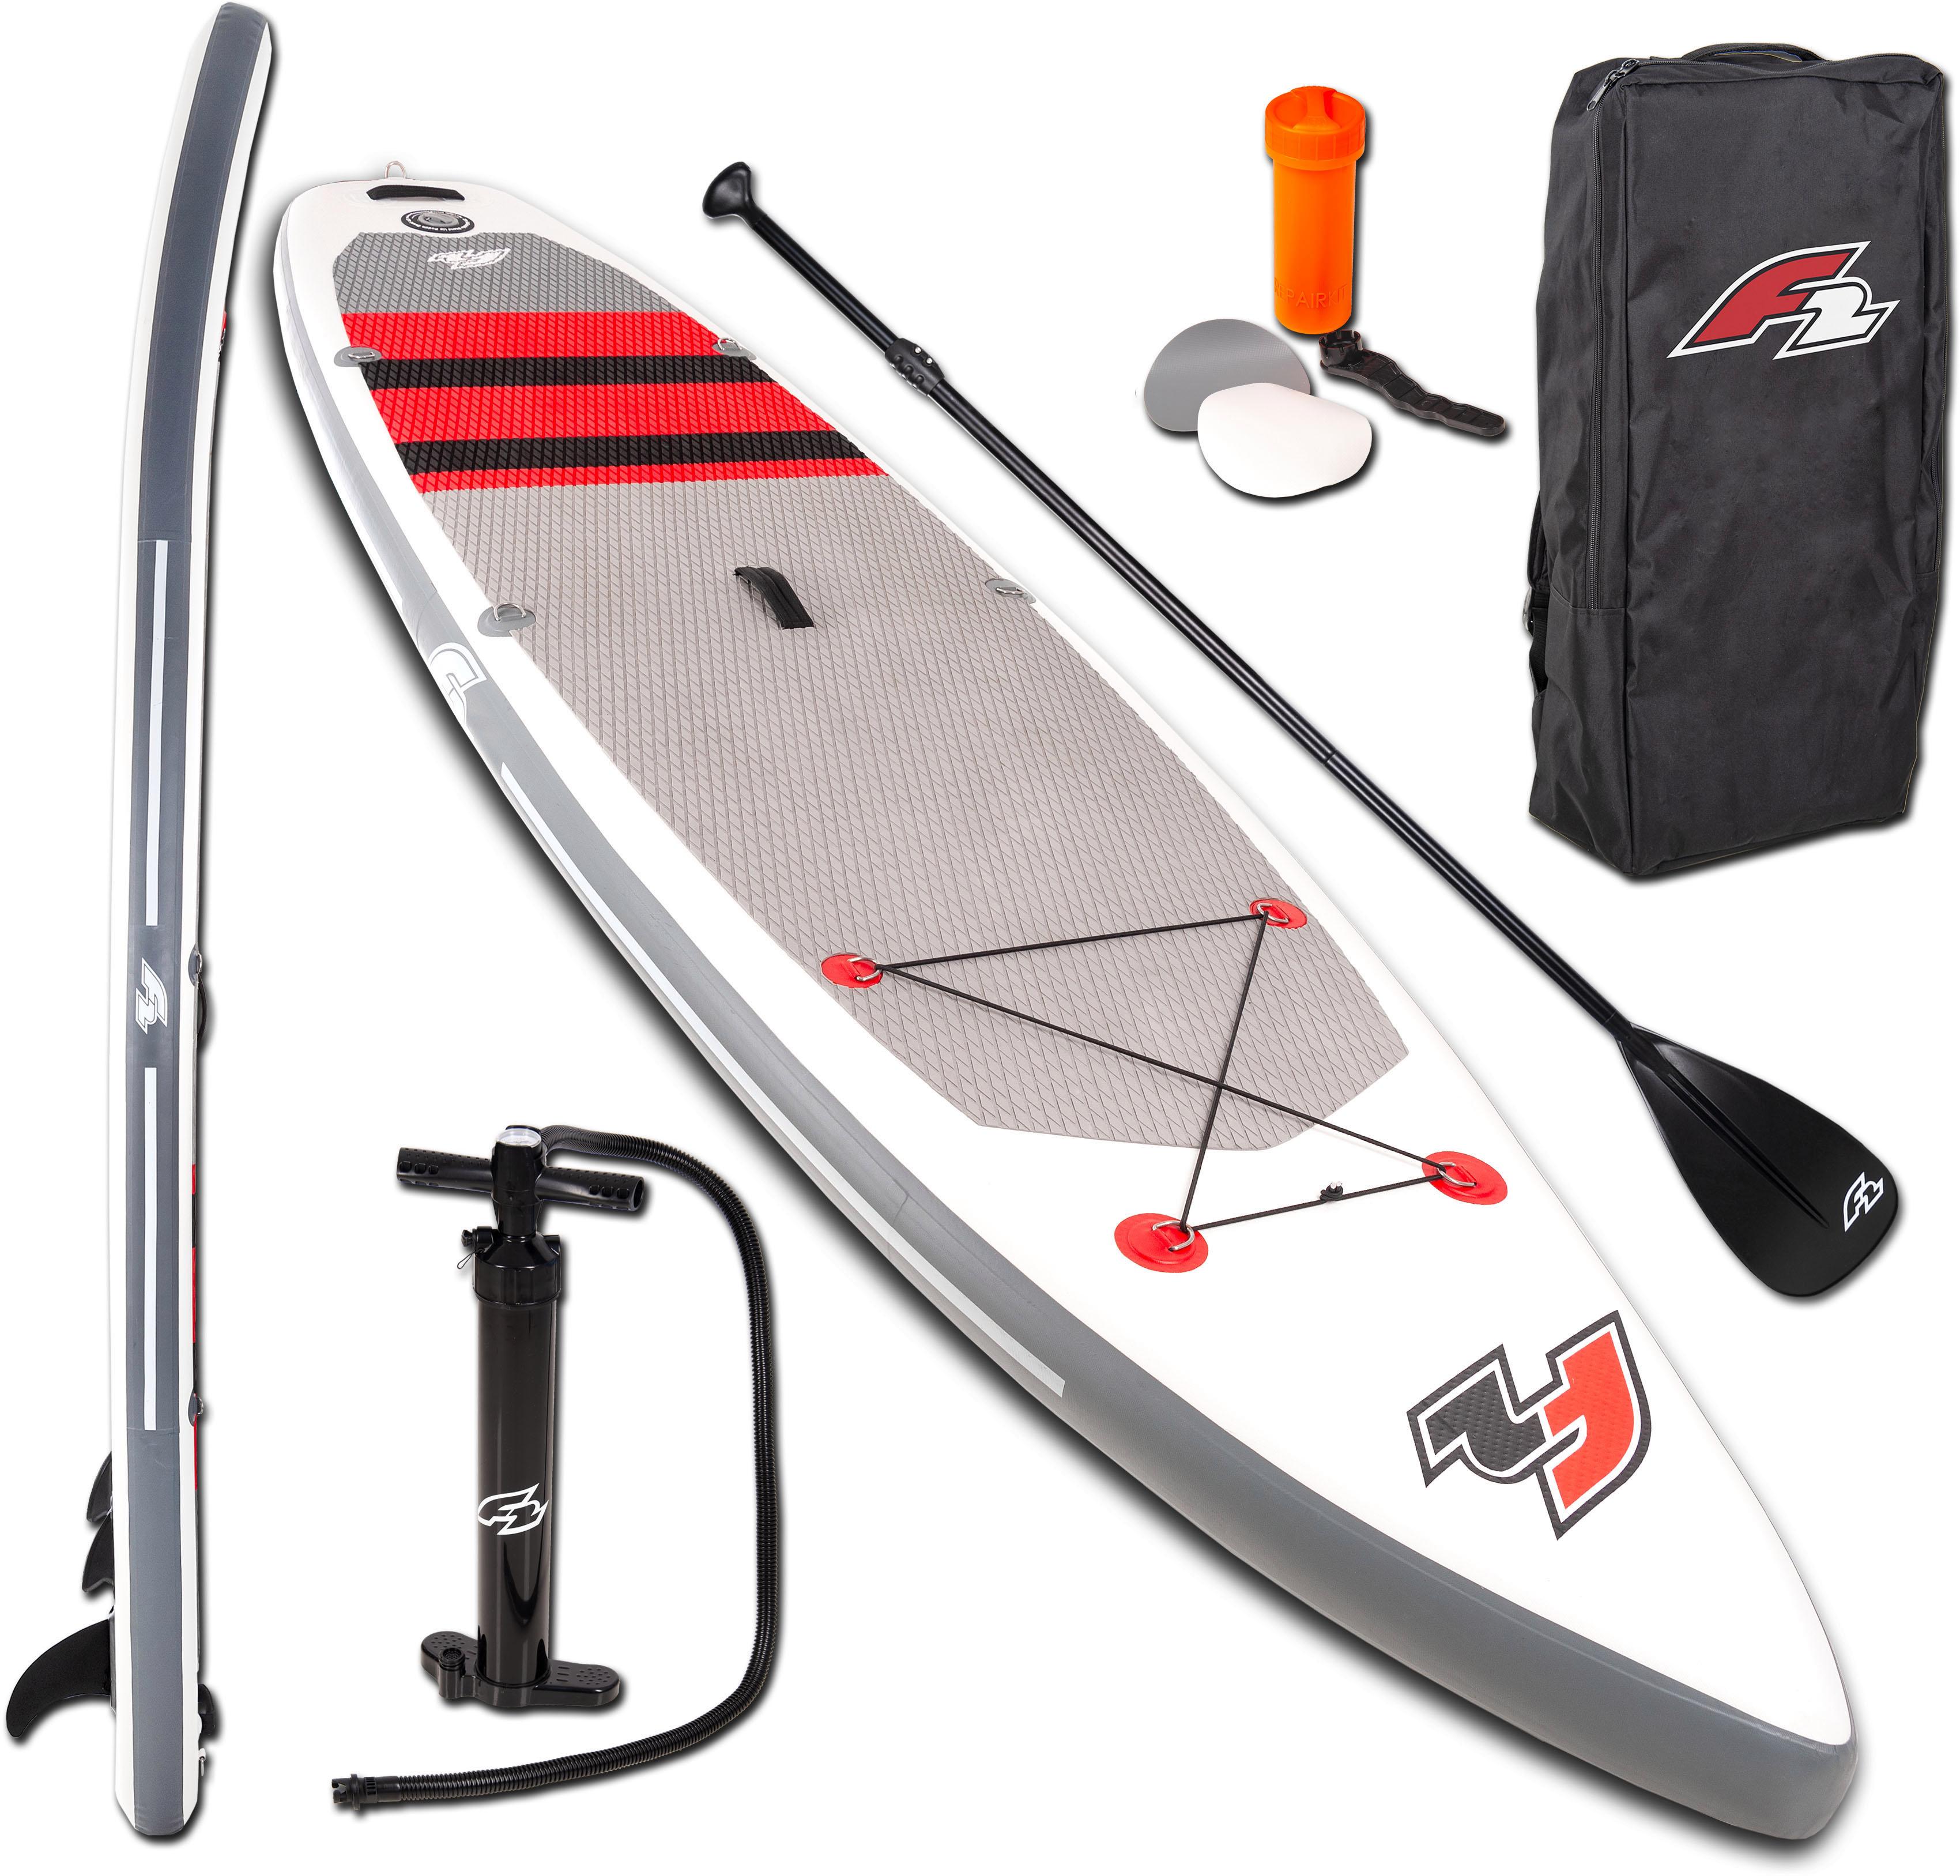 F2 Inflatable Up 11,5«, tlg.), kaufen OTTO »Union (Set, Stand SUP-Board bei 5 Paddling